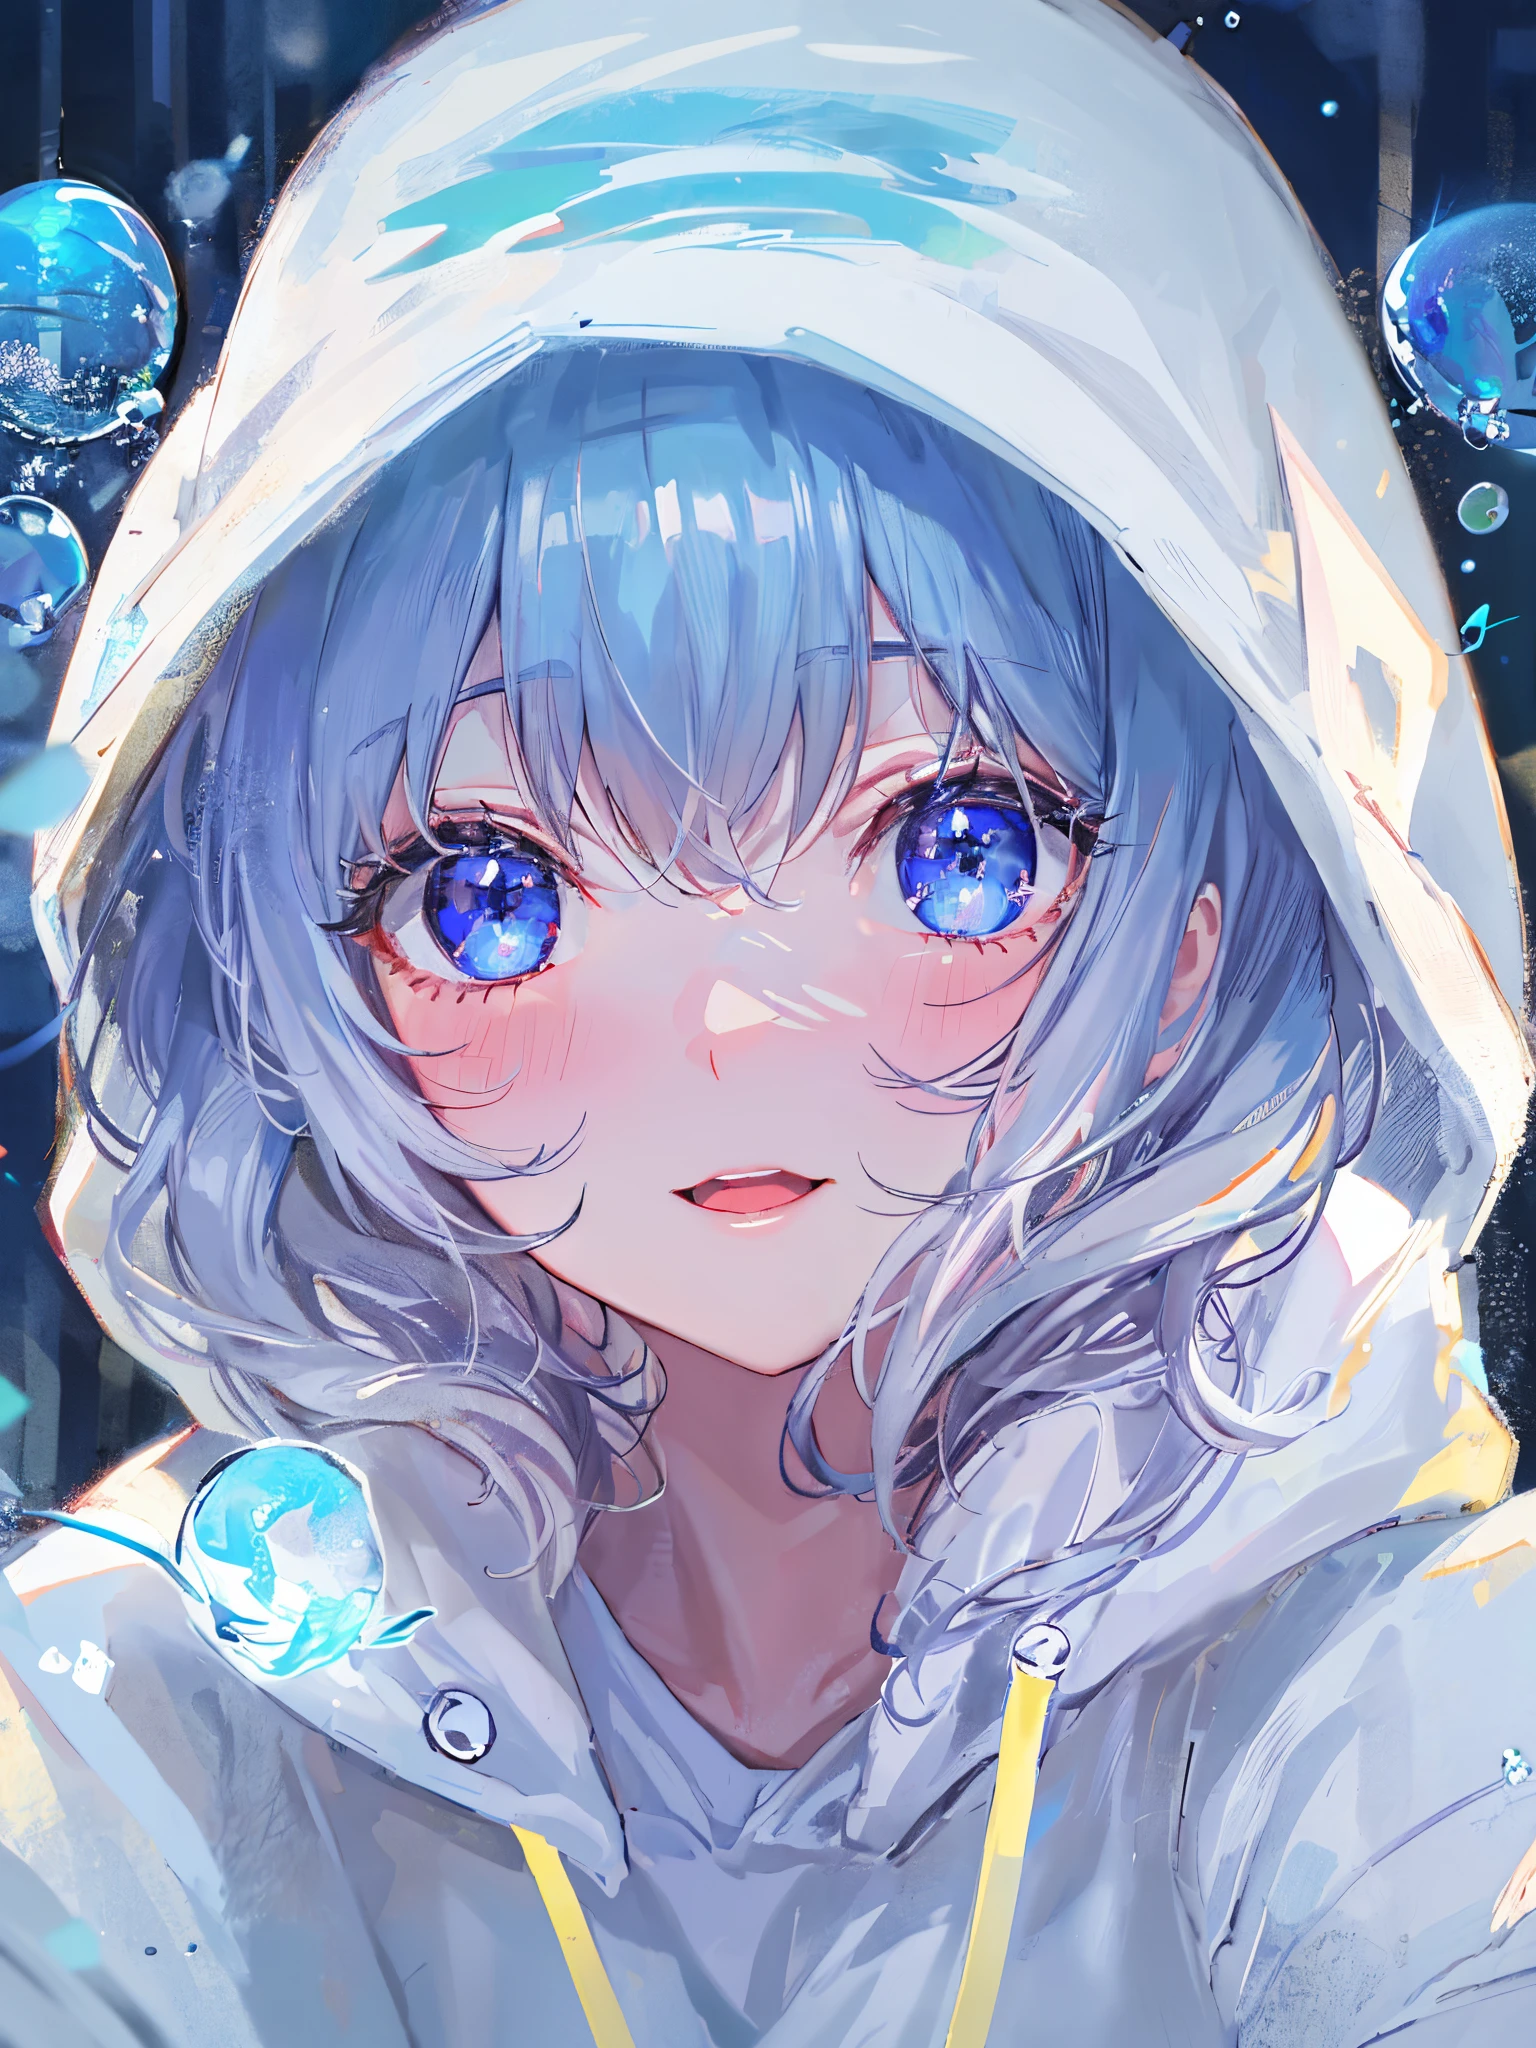 ((top-quality)), ((​masterpiece)), ((Ultra-detail)), (Extremely delicate and beautiful), girl with, solo, cold attitude,((White hoodie)),She is very(relax)with  the(Settled down)Looks,depth of fields,Evil smile,Bubble, under the water, Air bubble,Underwater world bright light blue eyes,inner color with bright gray hair and light blue tips,,,,,,,,,,,,,,,,,,,,,Cold background,Bob Hair - Linear Art, shortpants、knee high socks、White uniform like 、Light blue ribbon ties、Clothes are sheer、The hand in my right pocket is like a sapphire,Fronllesse Blue, A small blue light was floating、fantastic eyes、selfy,Self-shot